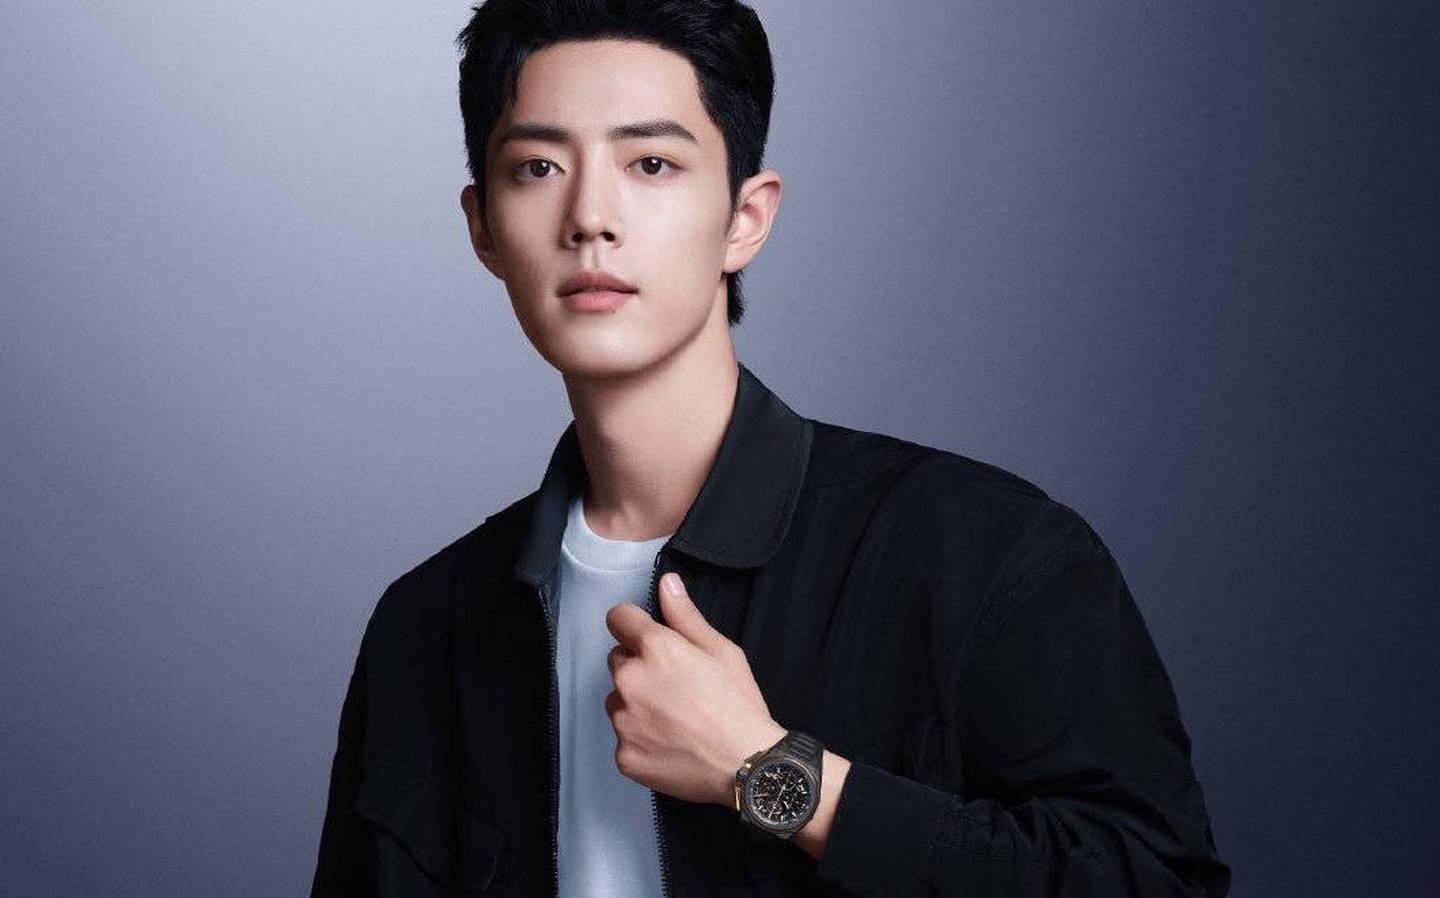 Xiao Zhan is the new face of Zenith watches. Zenith